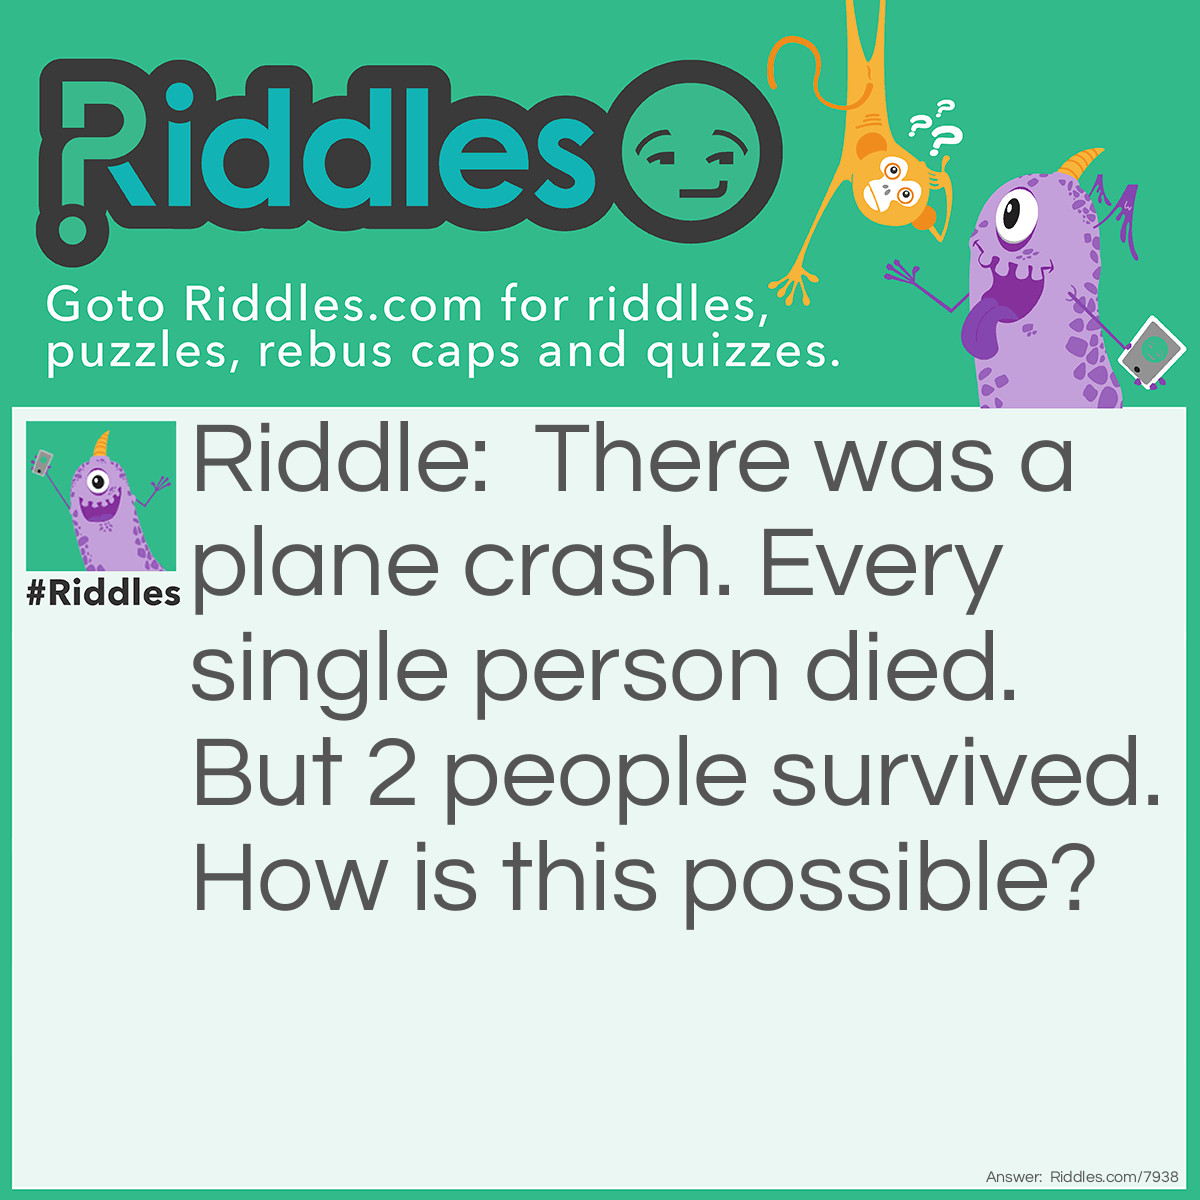 Riddle: There was a plane crash. Every single person died. But 2 people survived. How is this possible? Answer: Every SINGLE person. The two people who survived were a couple. Everyone who didn't have a partner died.